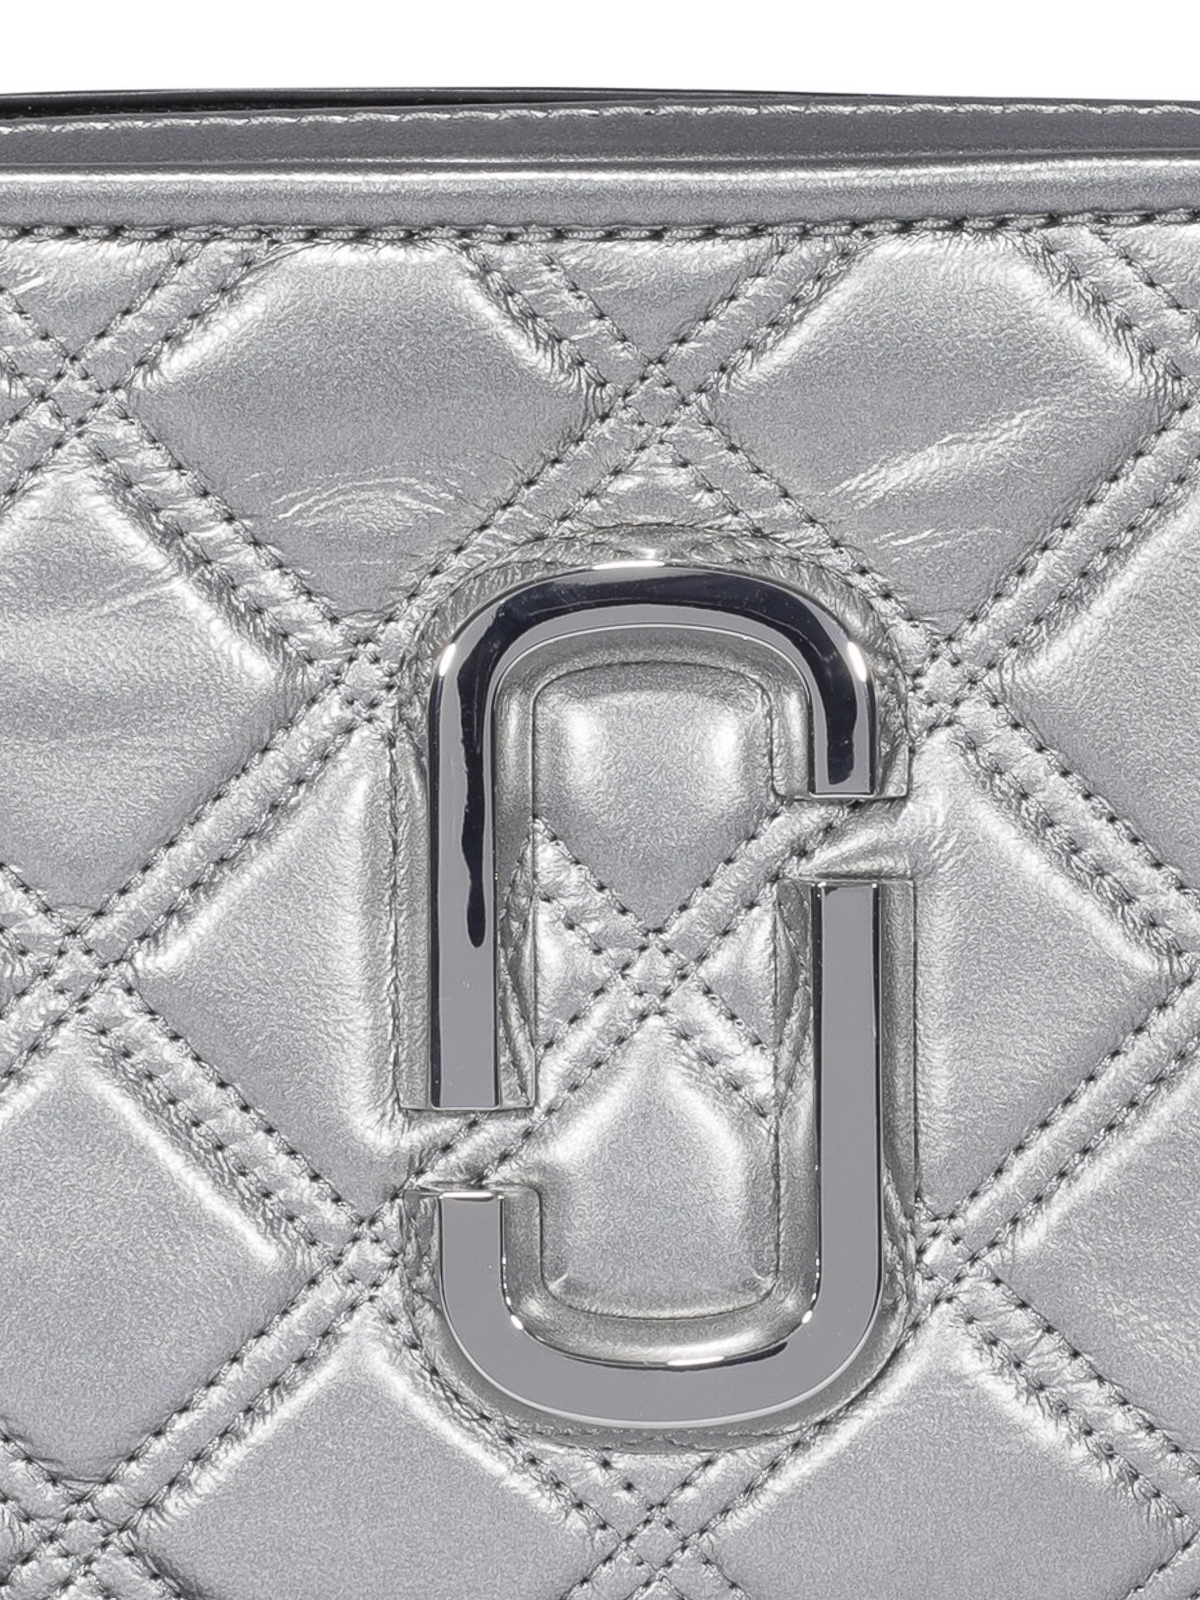 Marc Jacobs The Quilted Softshot 21 Leather Crossbody Bag